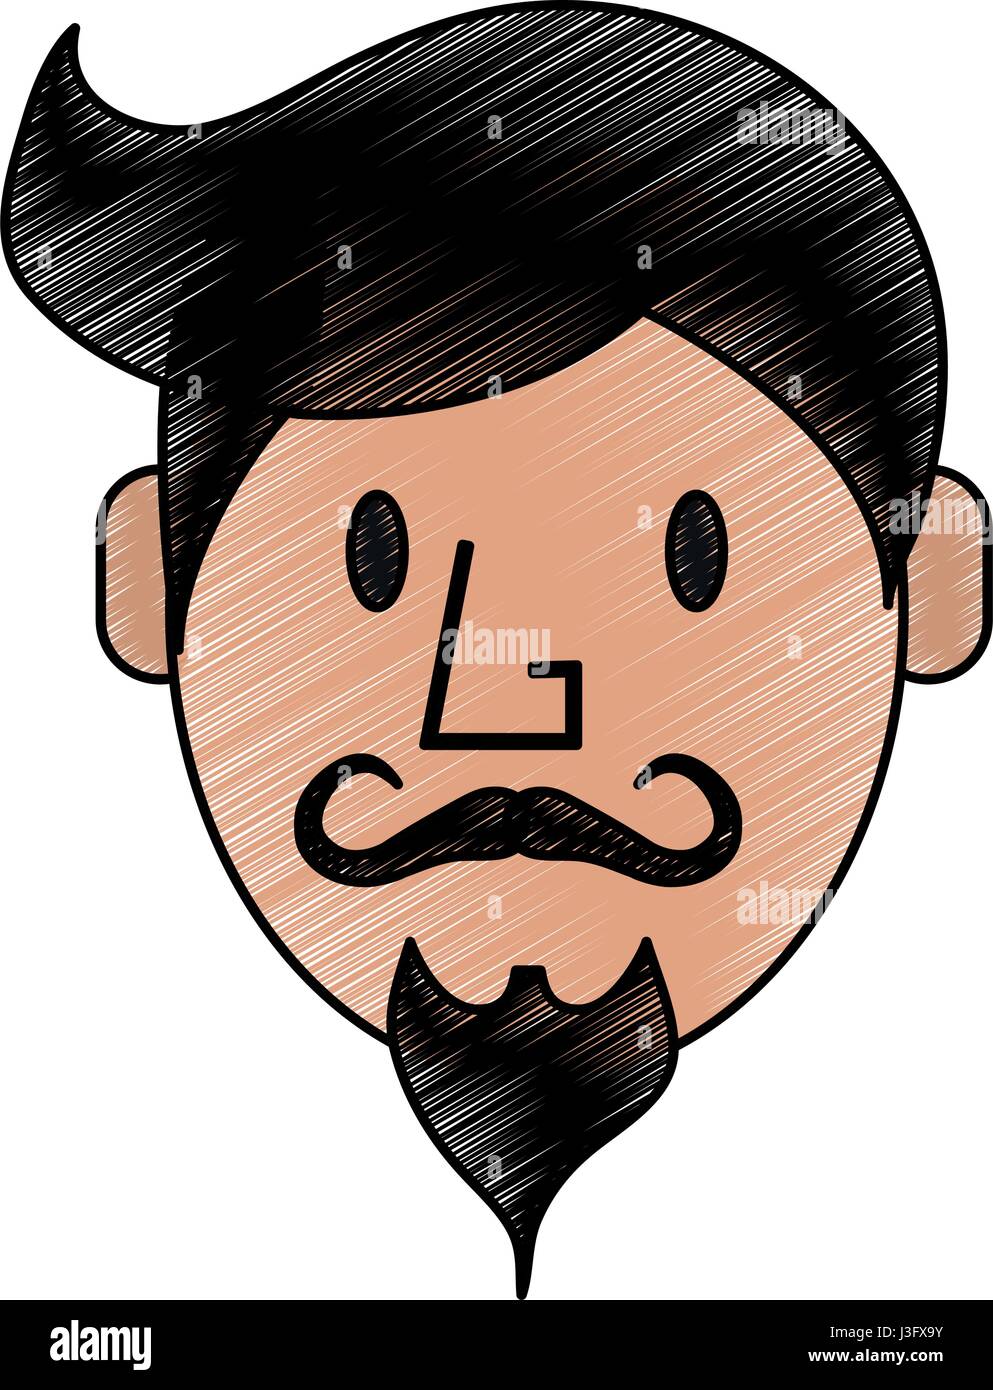 french cartoon character with pencil mustache